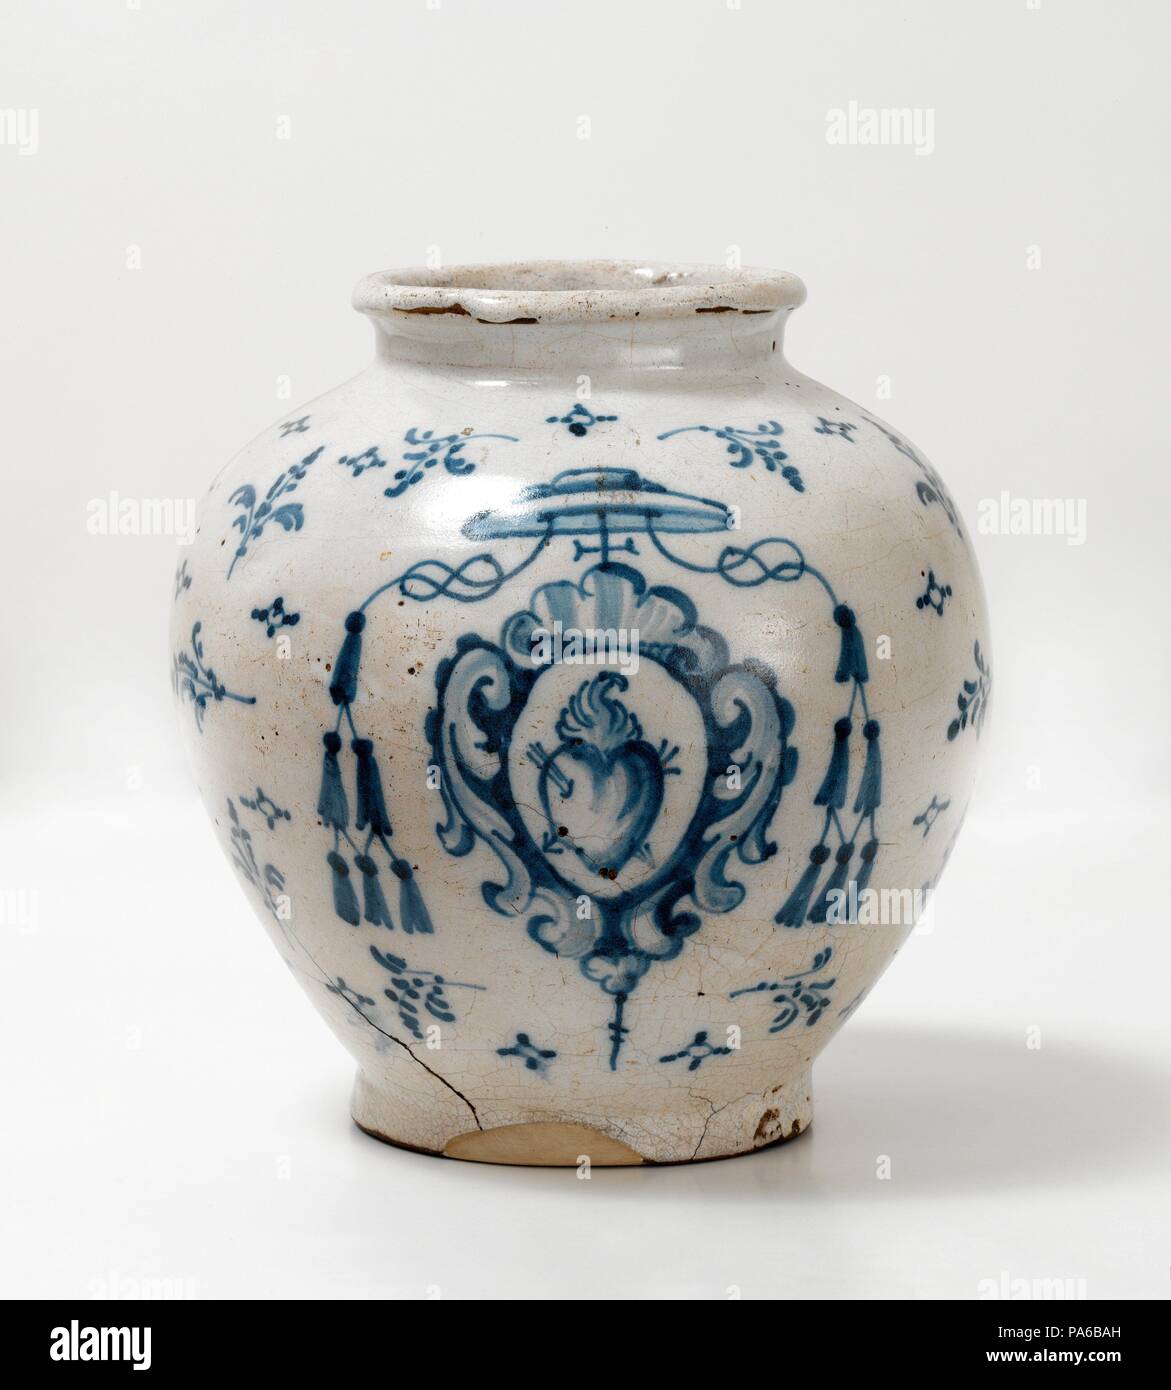 Orza de farmacia, 18th century, Ceramics (earthenware decorated in blue, with the emblem of the order of the Augustinians and plant motifs), by Tavalera de la Reina (Toledo), Height: 20 cm. Museum: Museo Fundación Francisco Godia, Barcelona, Cataluña, España. Stock Photo